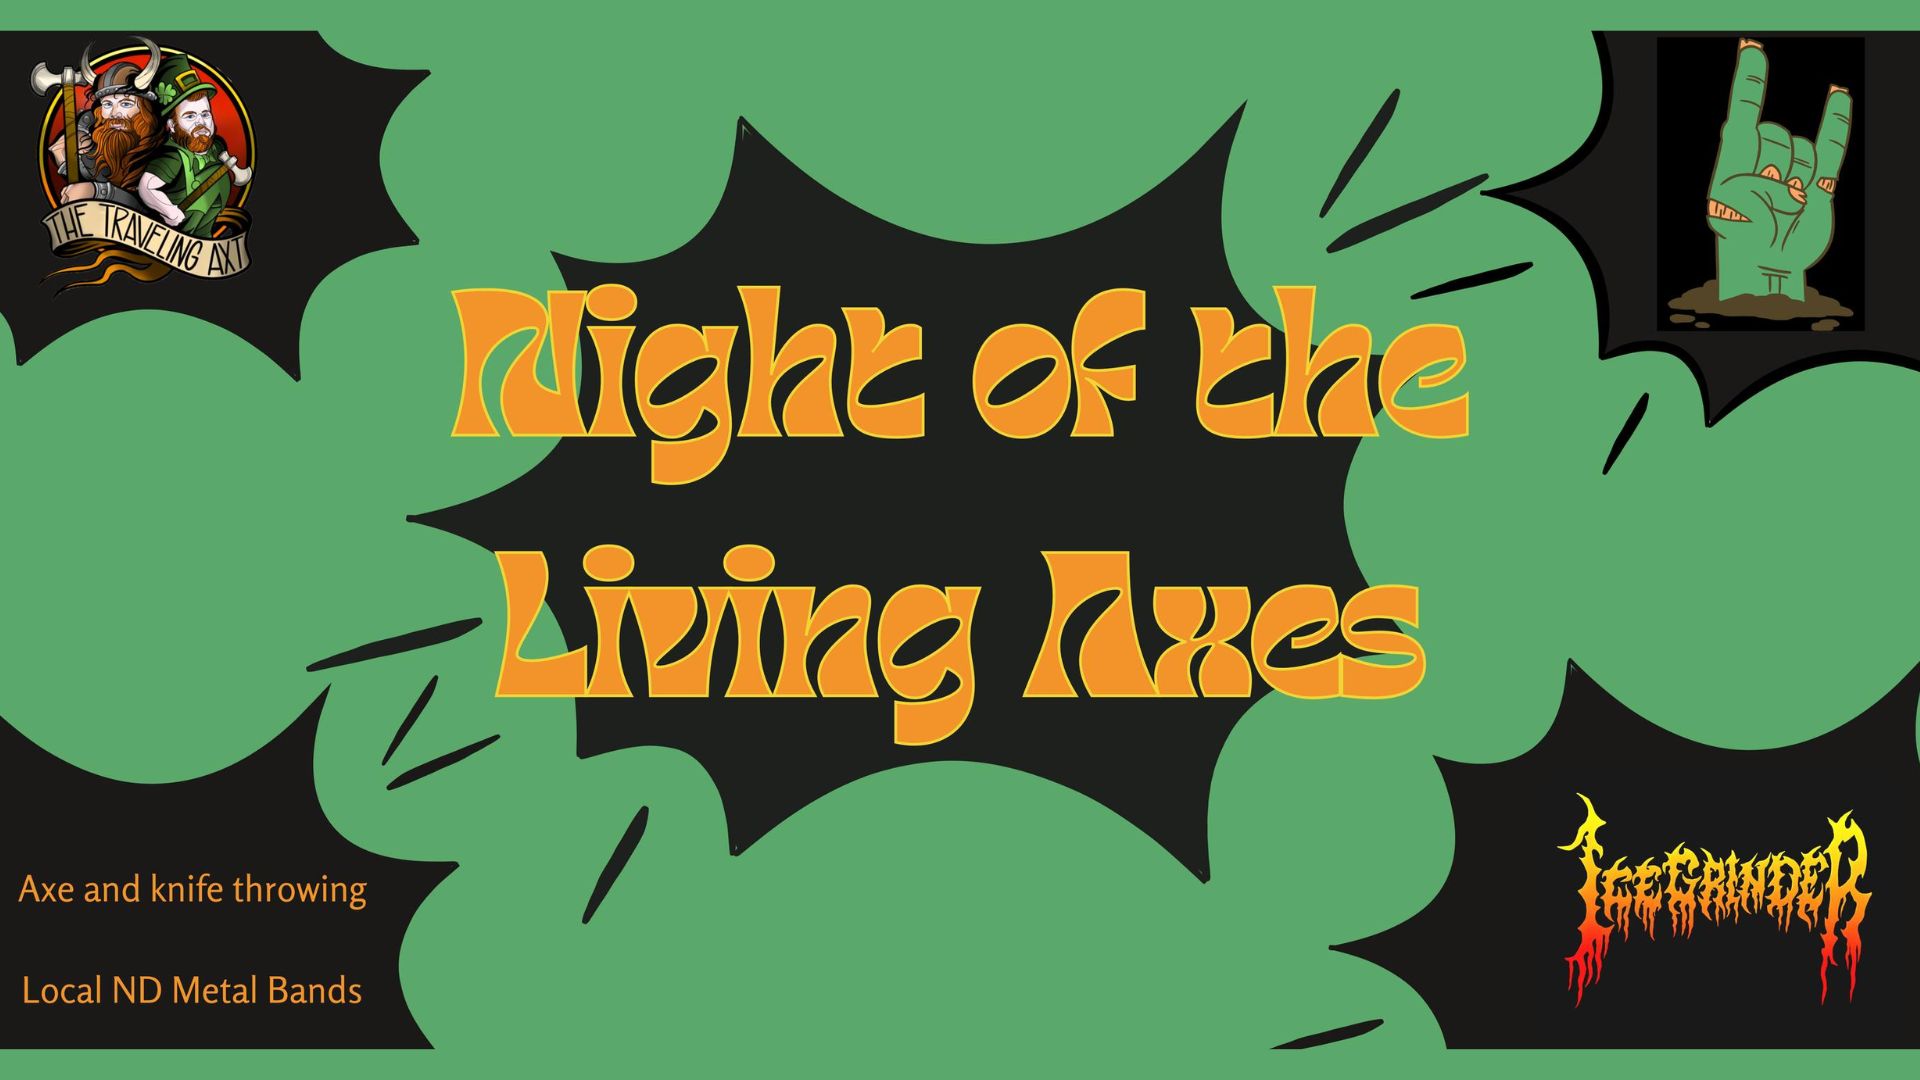 Night of the living axes